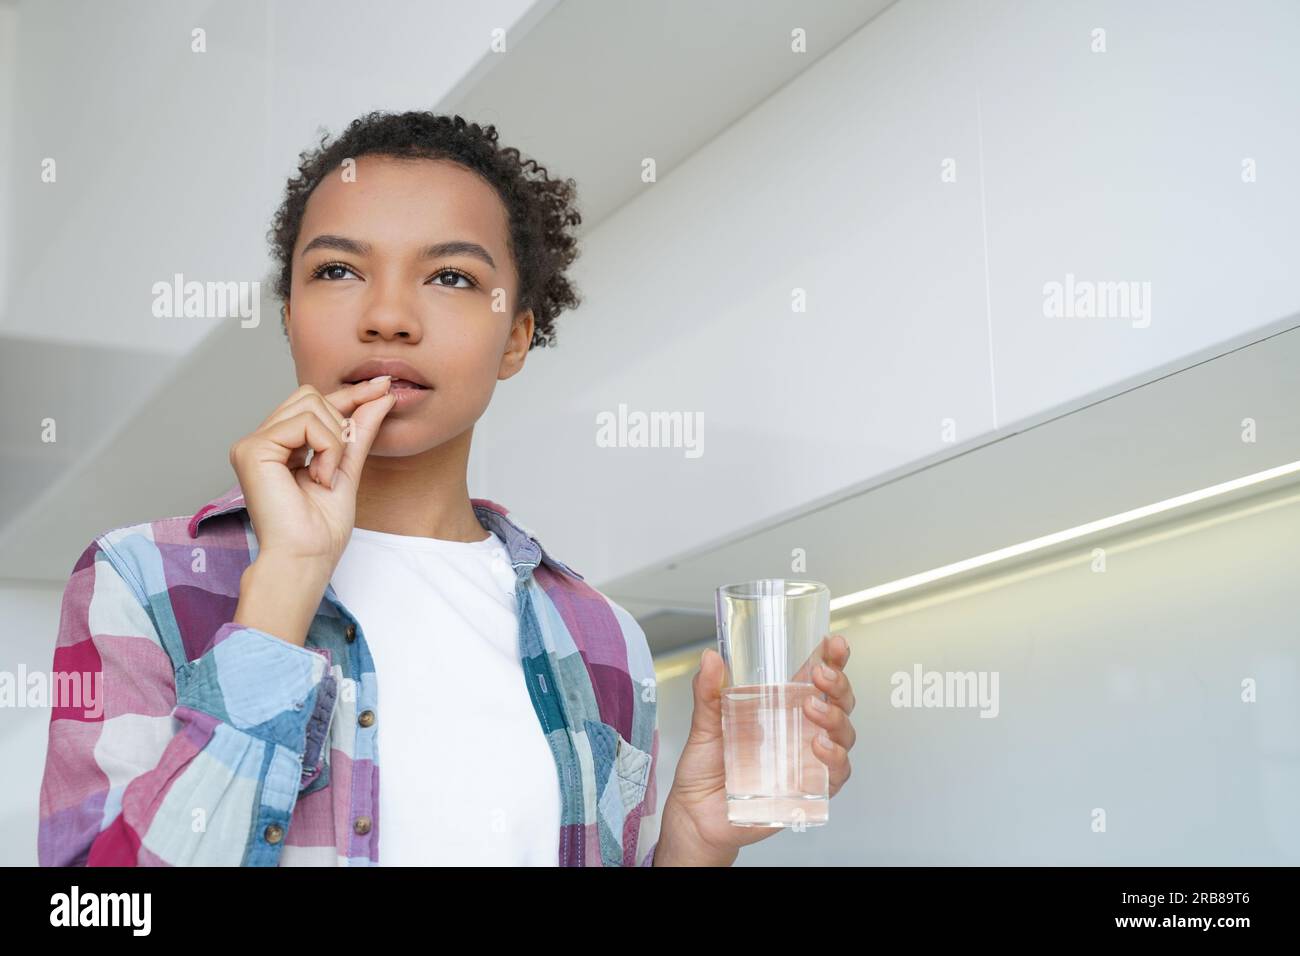 Pensive biracial girl takes pill, holding water, promoting healthy lifestyle and wellness with medicine, supplements, vitamins. Stock Photo